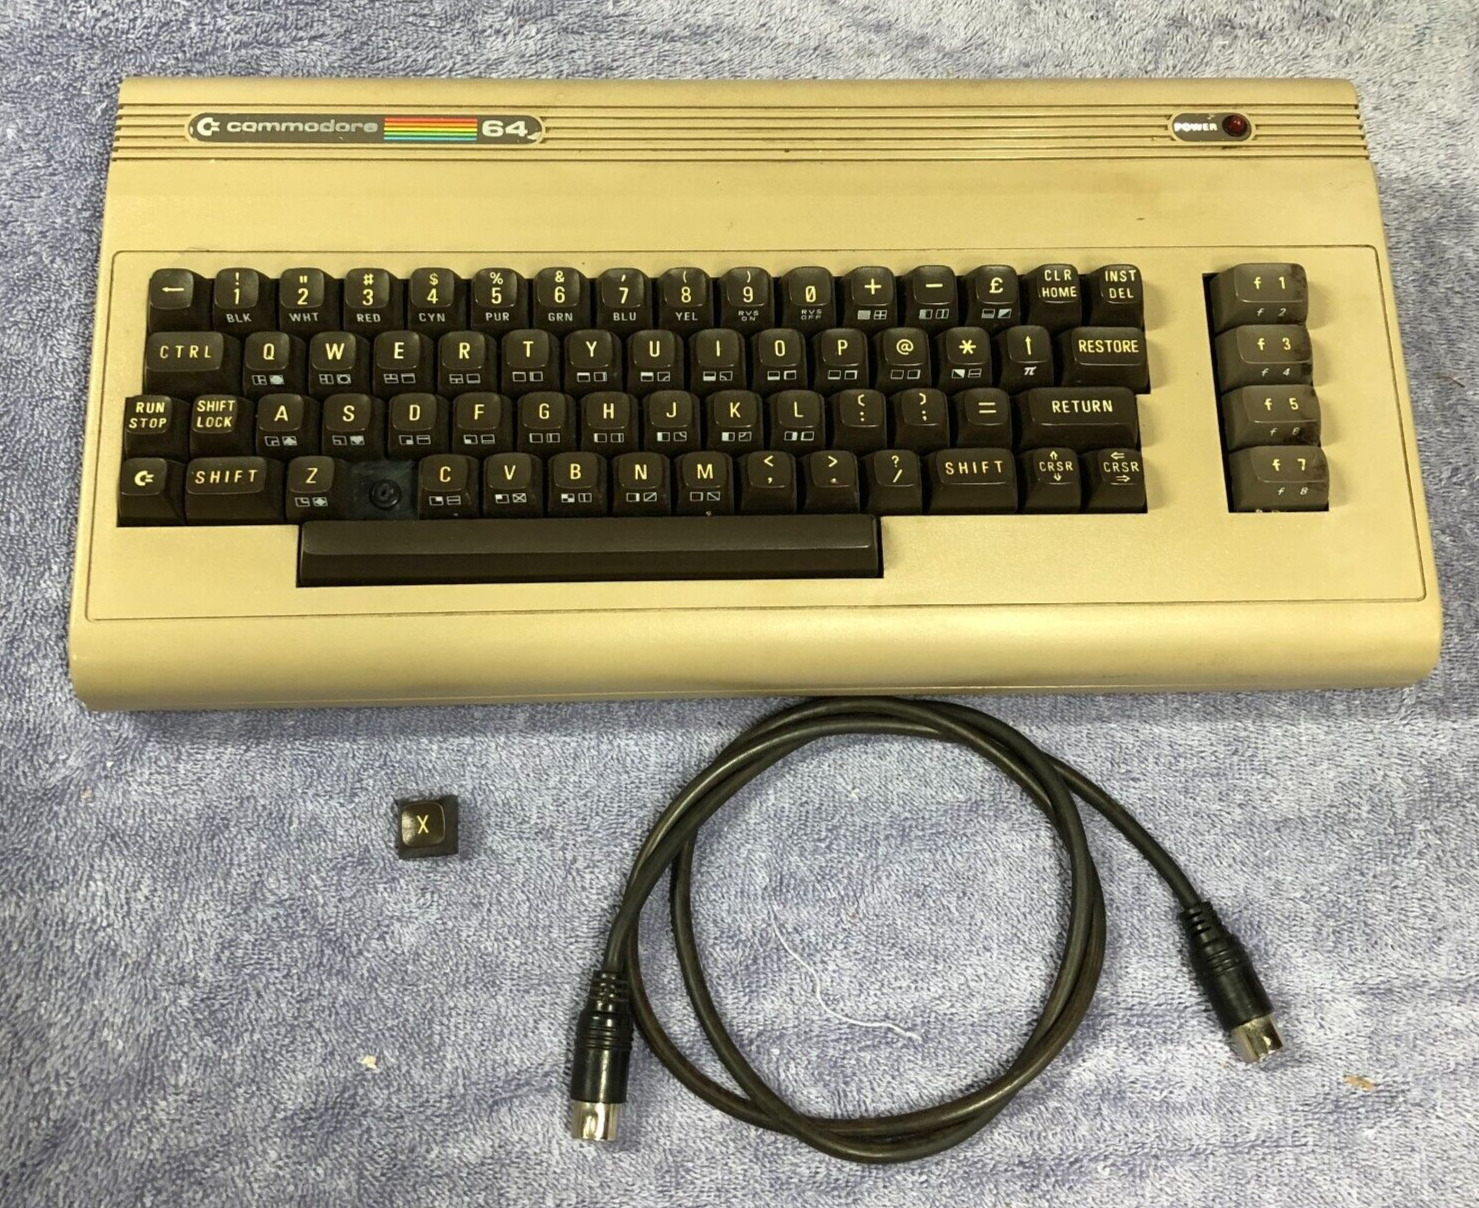 Vintage Commodore 64 Computer, Untested, Power Light Turns On